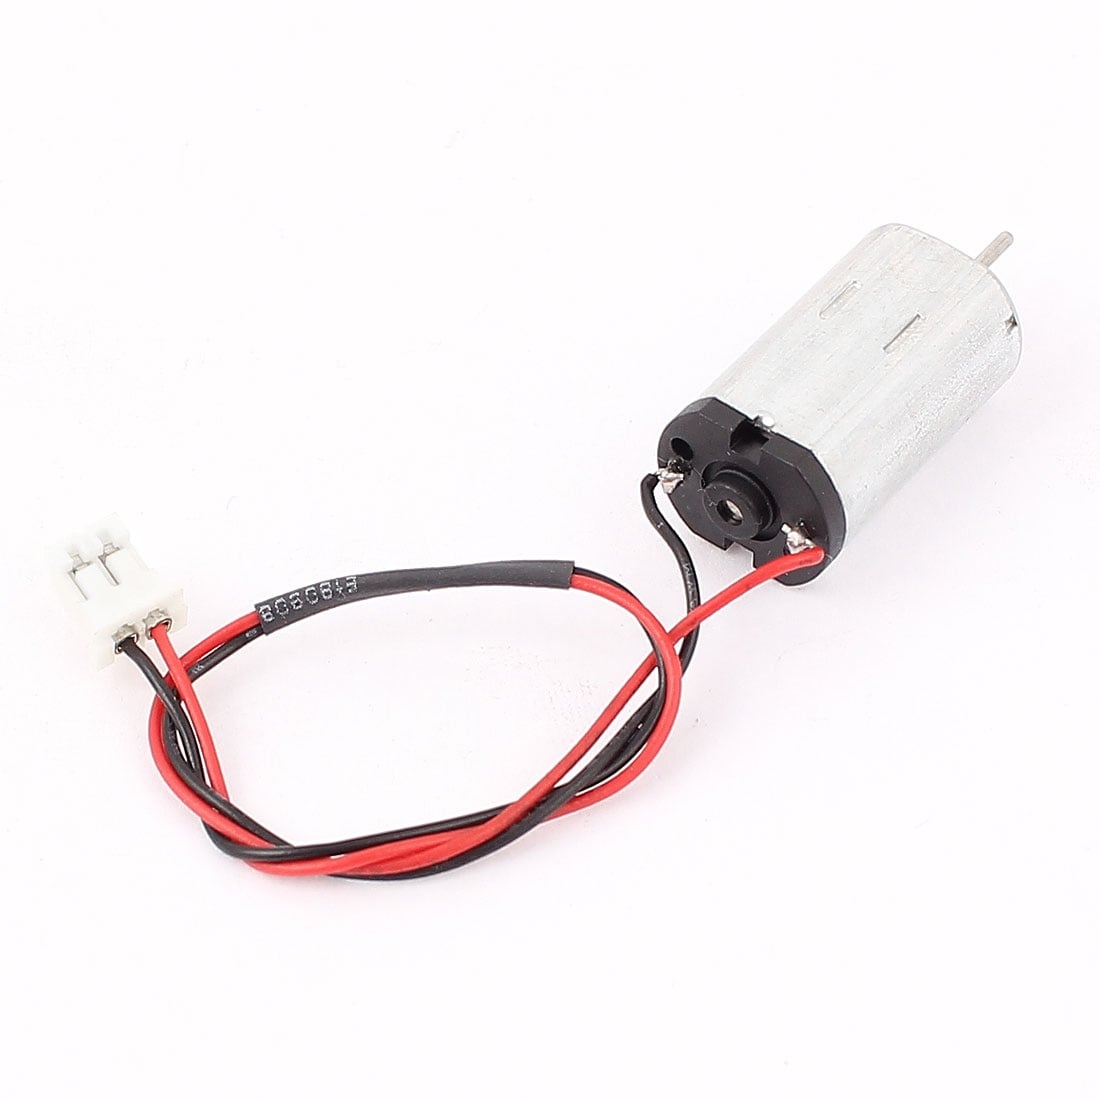 DC 1.5V-6V 26500RPM High Speed Micro Motor for Toy Accessories - Silver Tone, Black